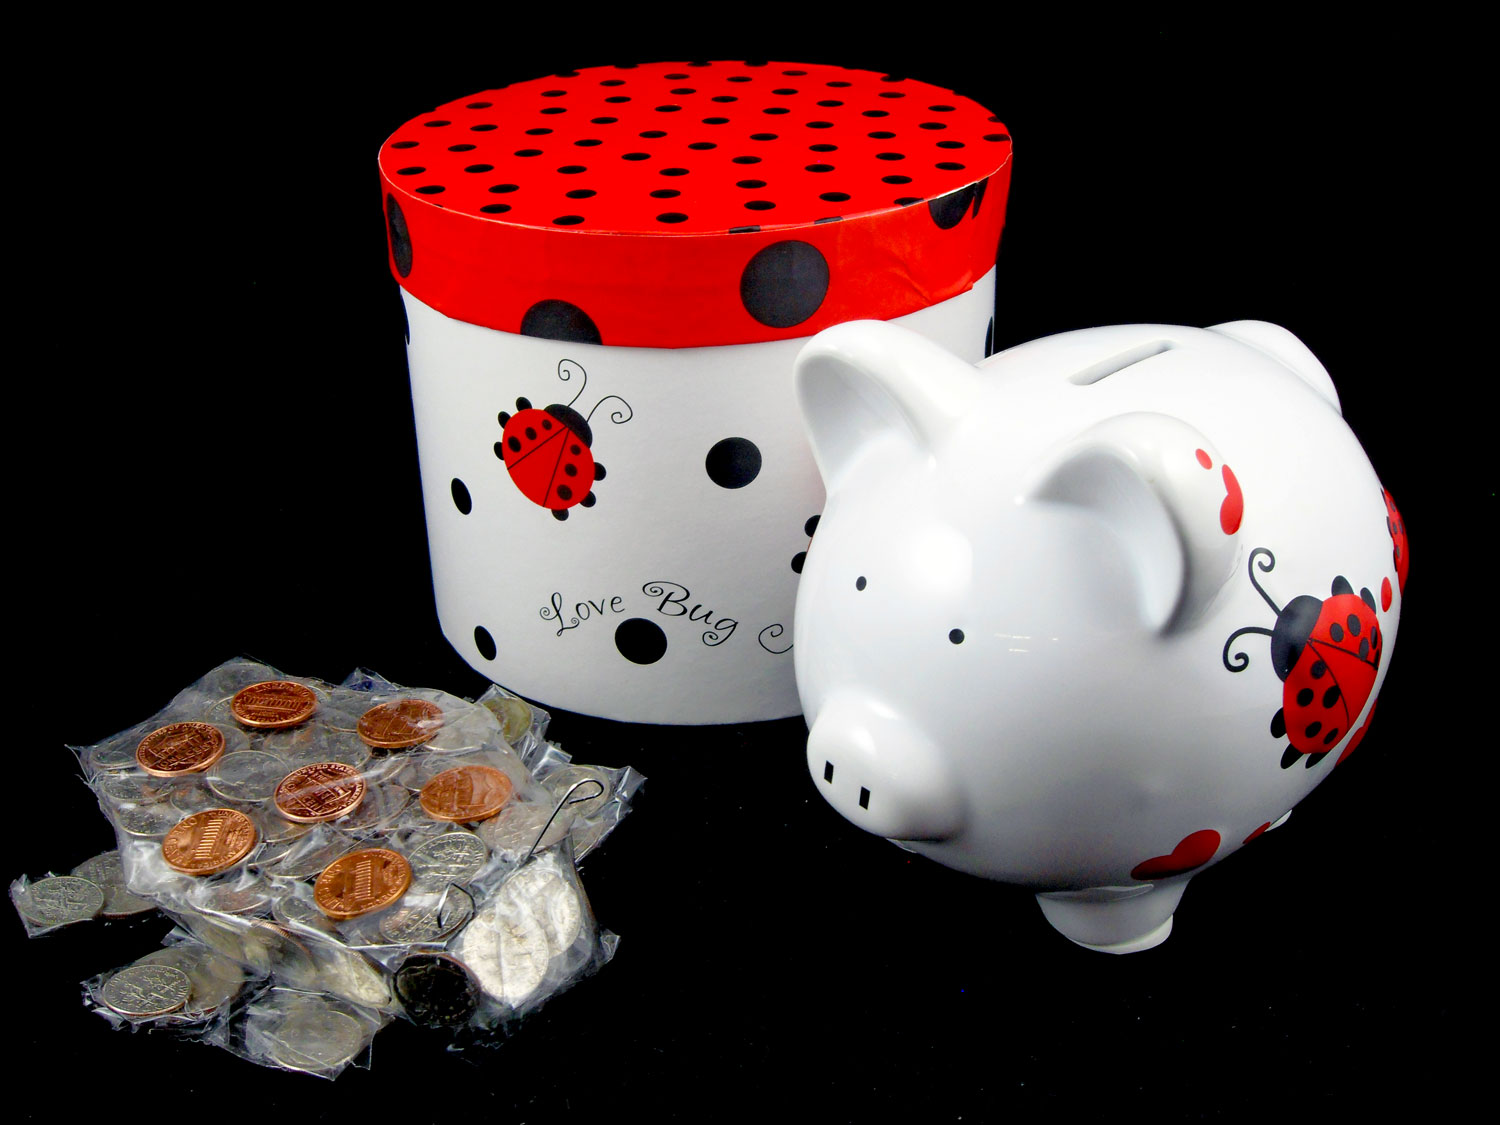 Girl's piggy bank with a red ladybug painted on the side next to a coin sculpture ladybug | OrnamentShop.com